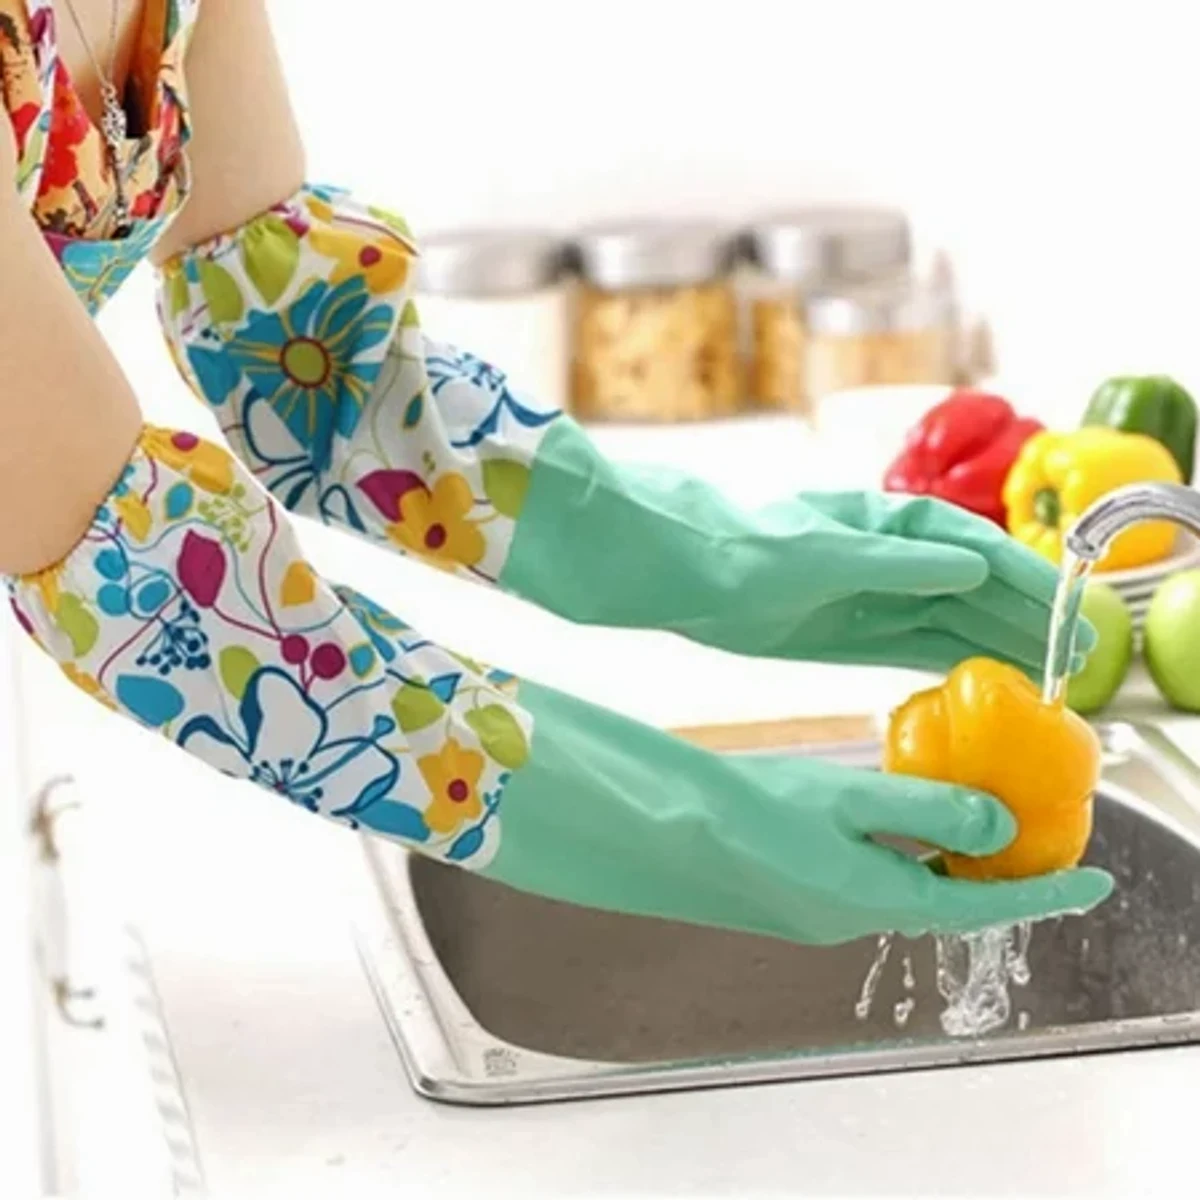 Waterproof Dish Washing And Cleaning Gloves 1 Pair